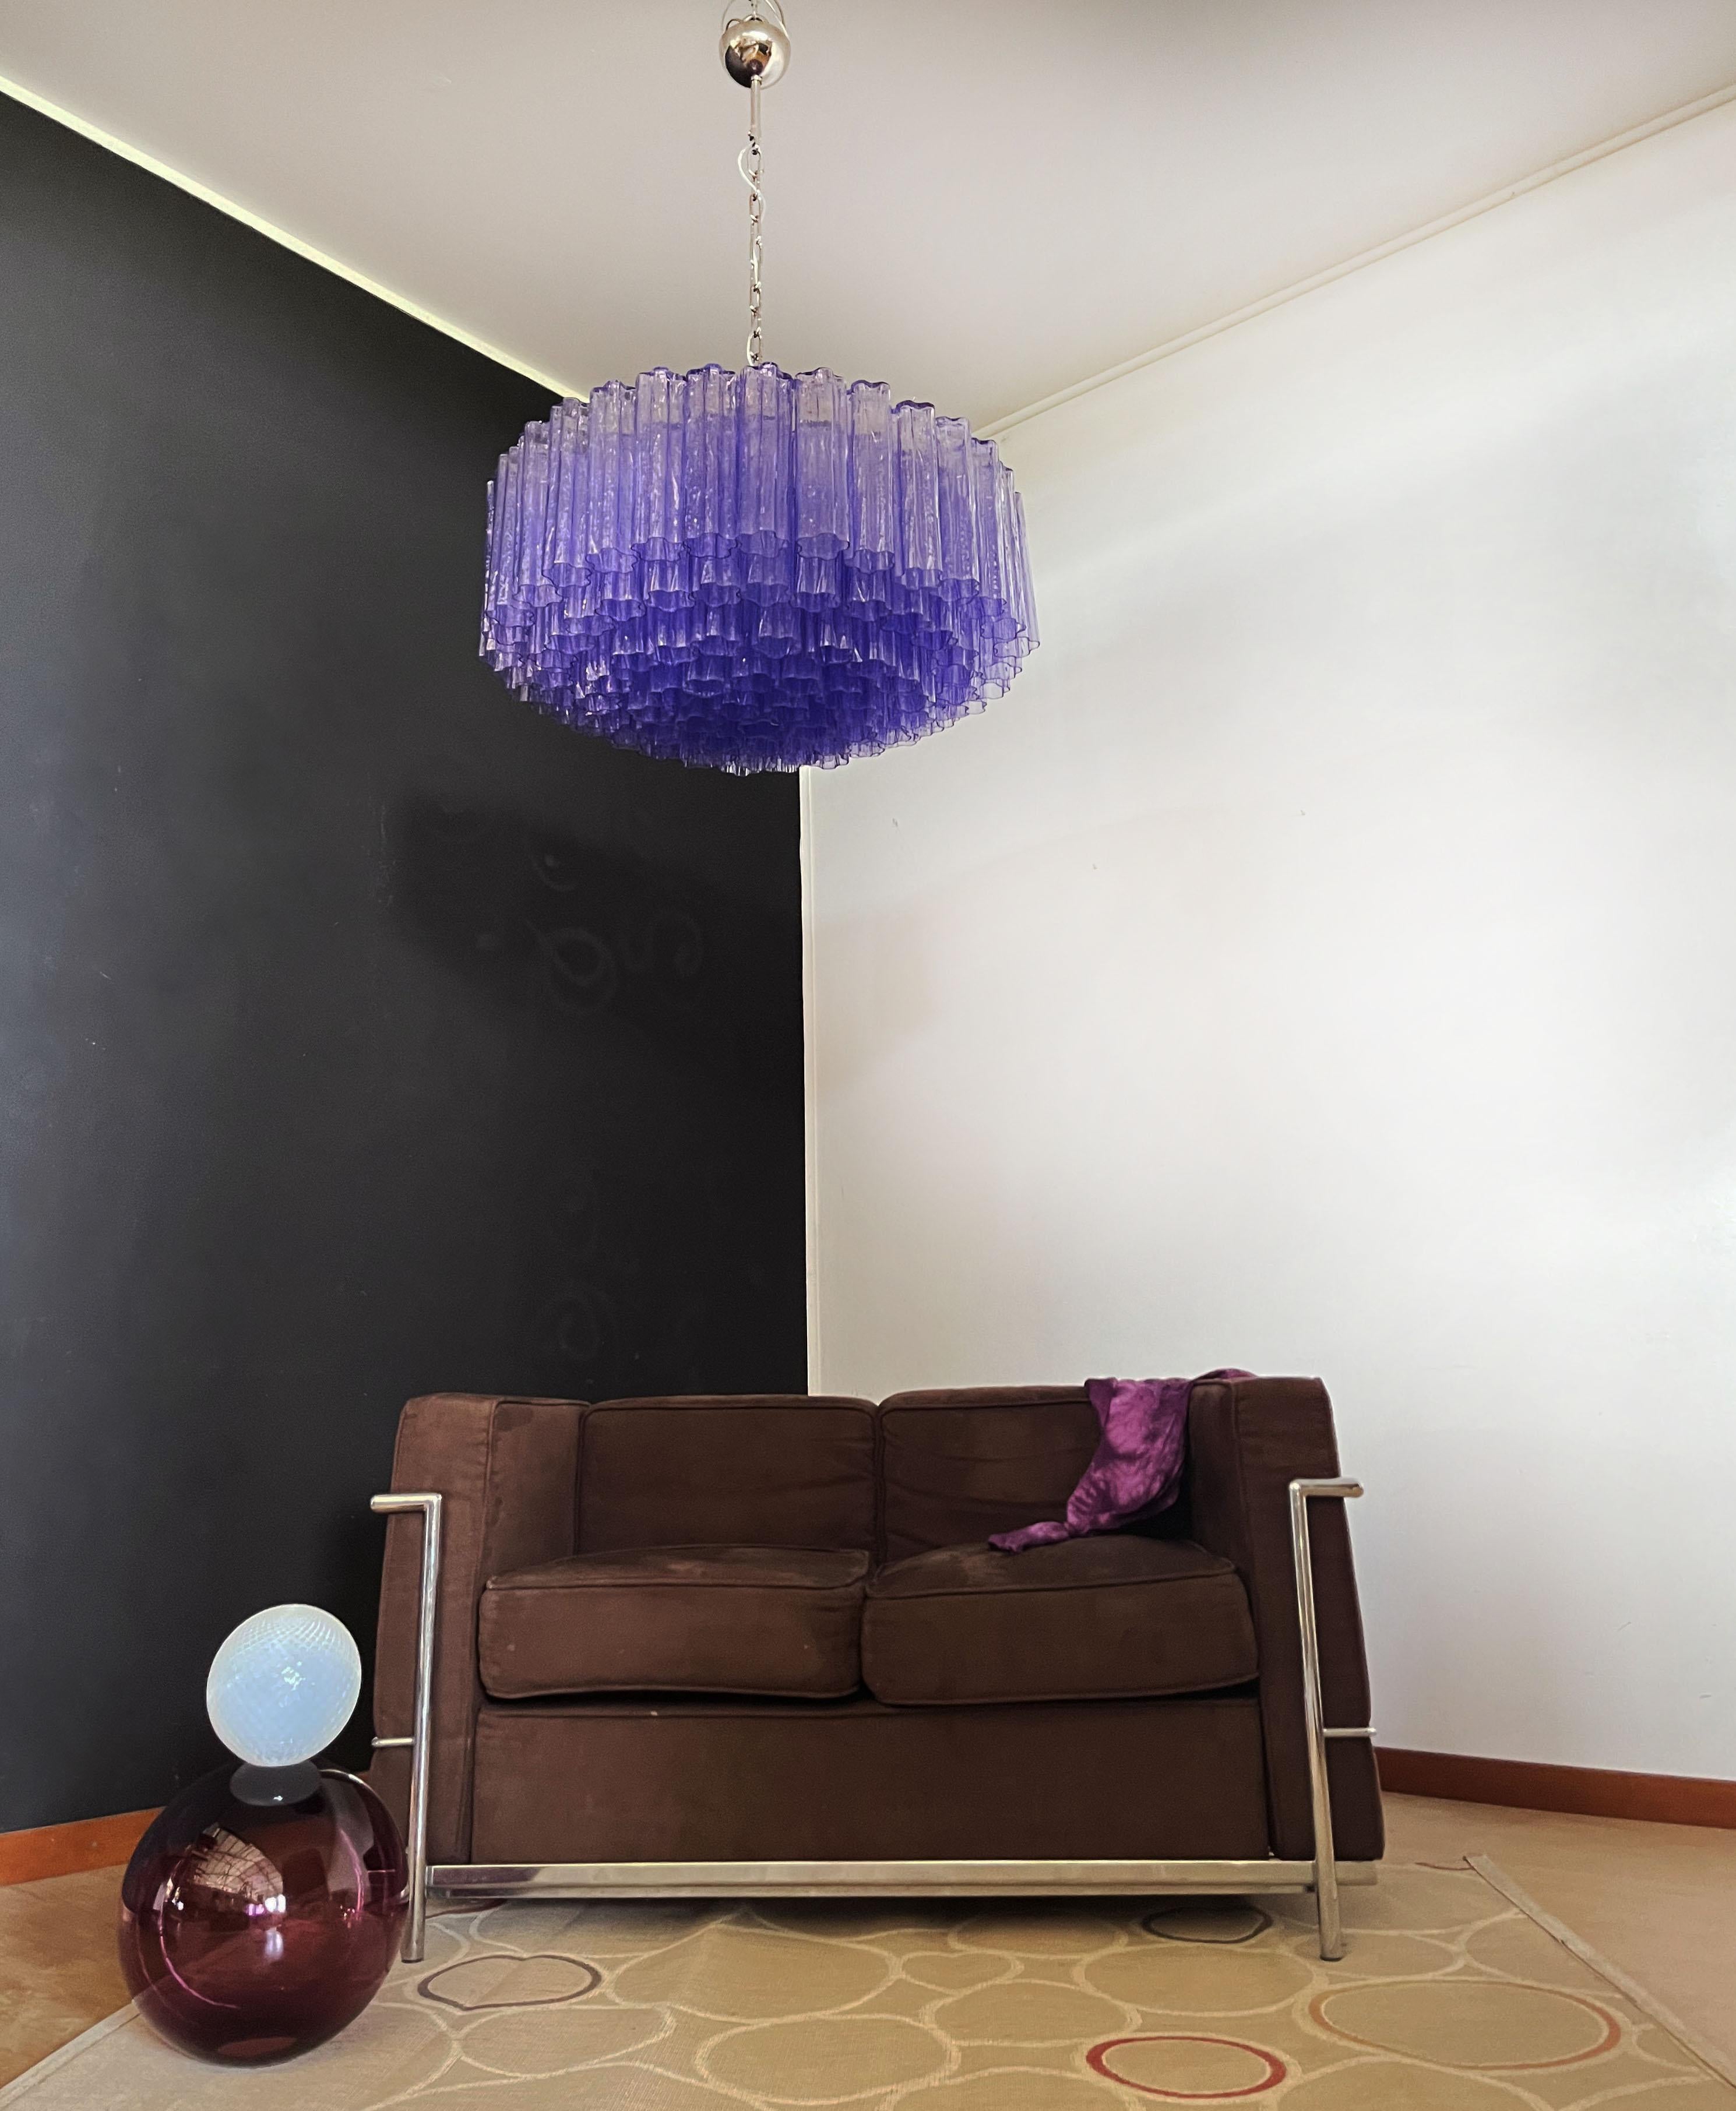 Italian vintage chandelier in Murano glass and nickel plated metal structure. The armor polished nickel supports 101 large amethyst glass tubes in a star shape. Can be used as a chandelier with chain, or as a ceiling light, the structure will be